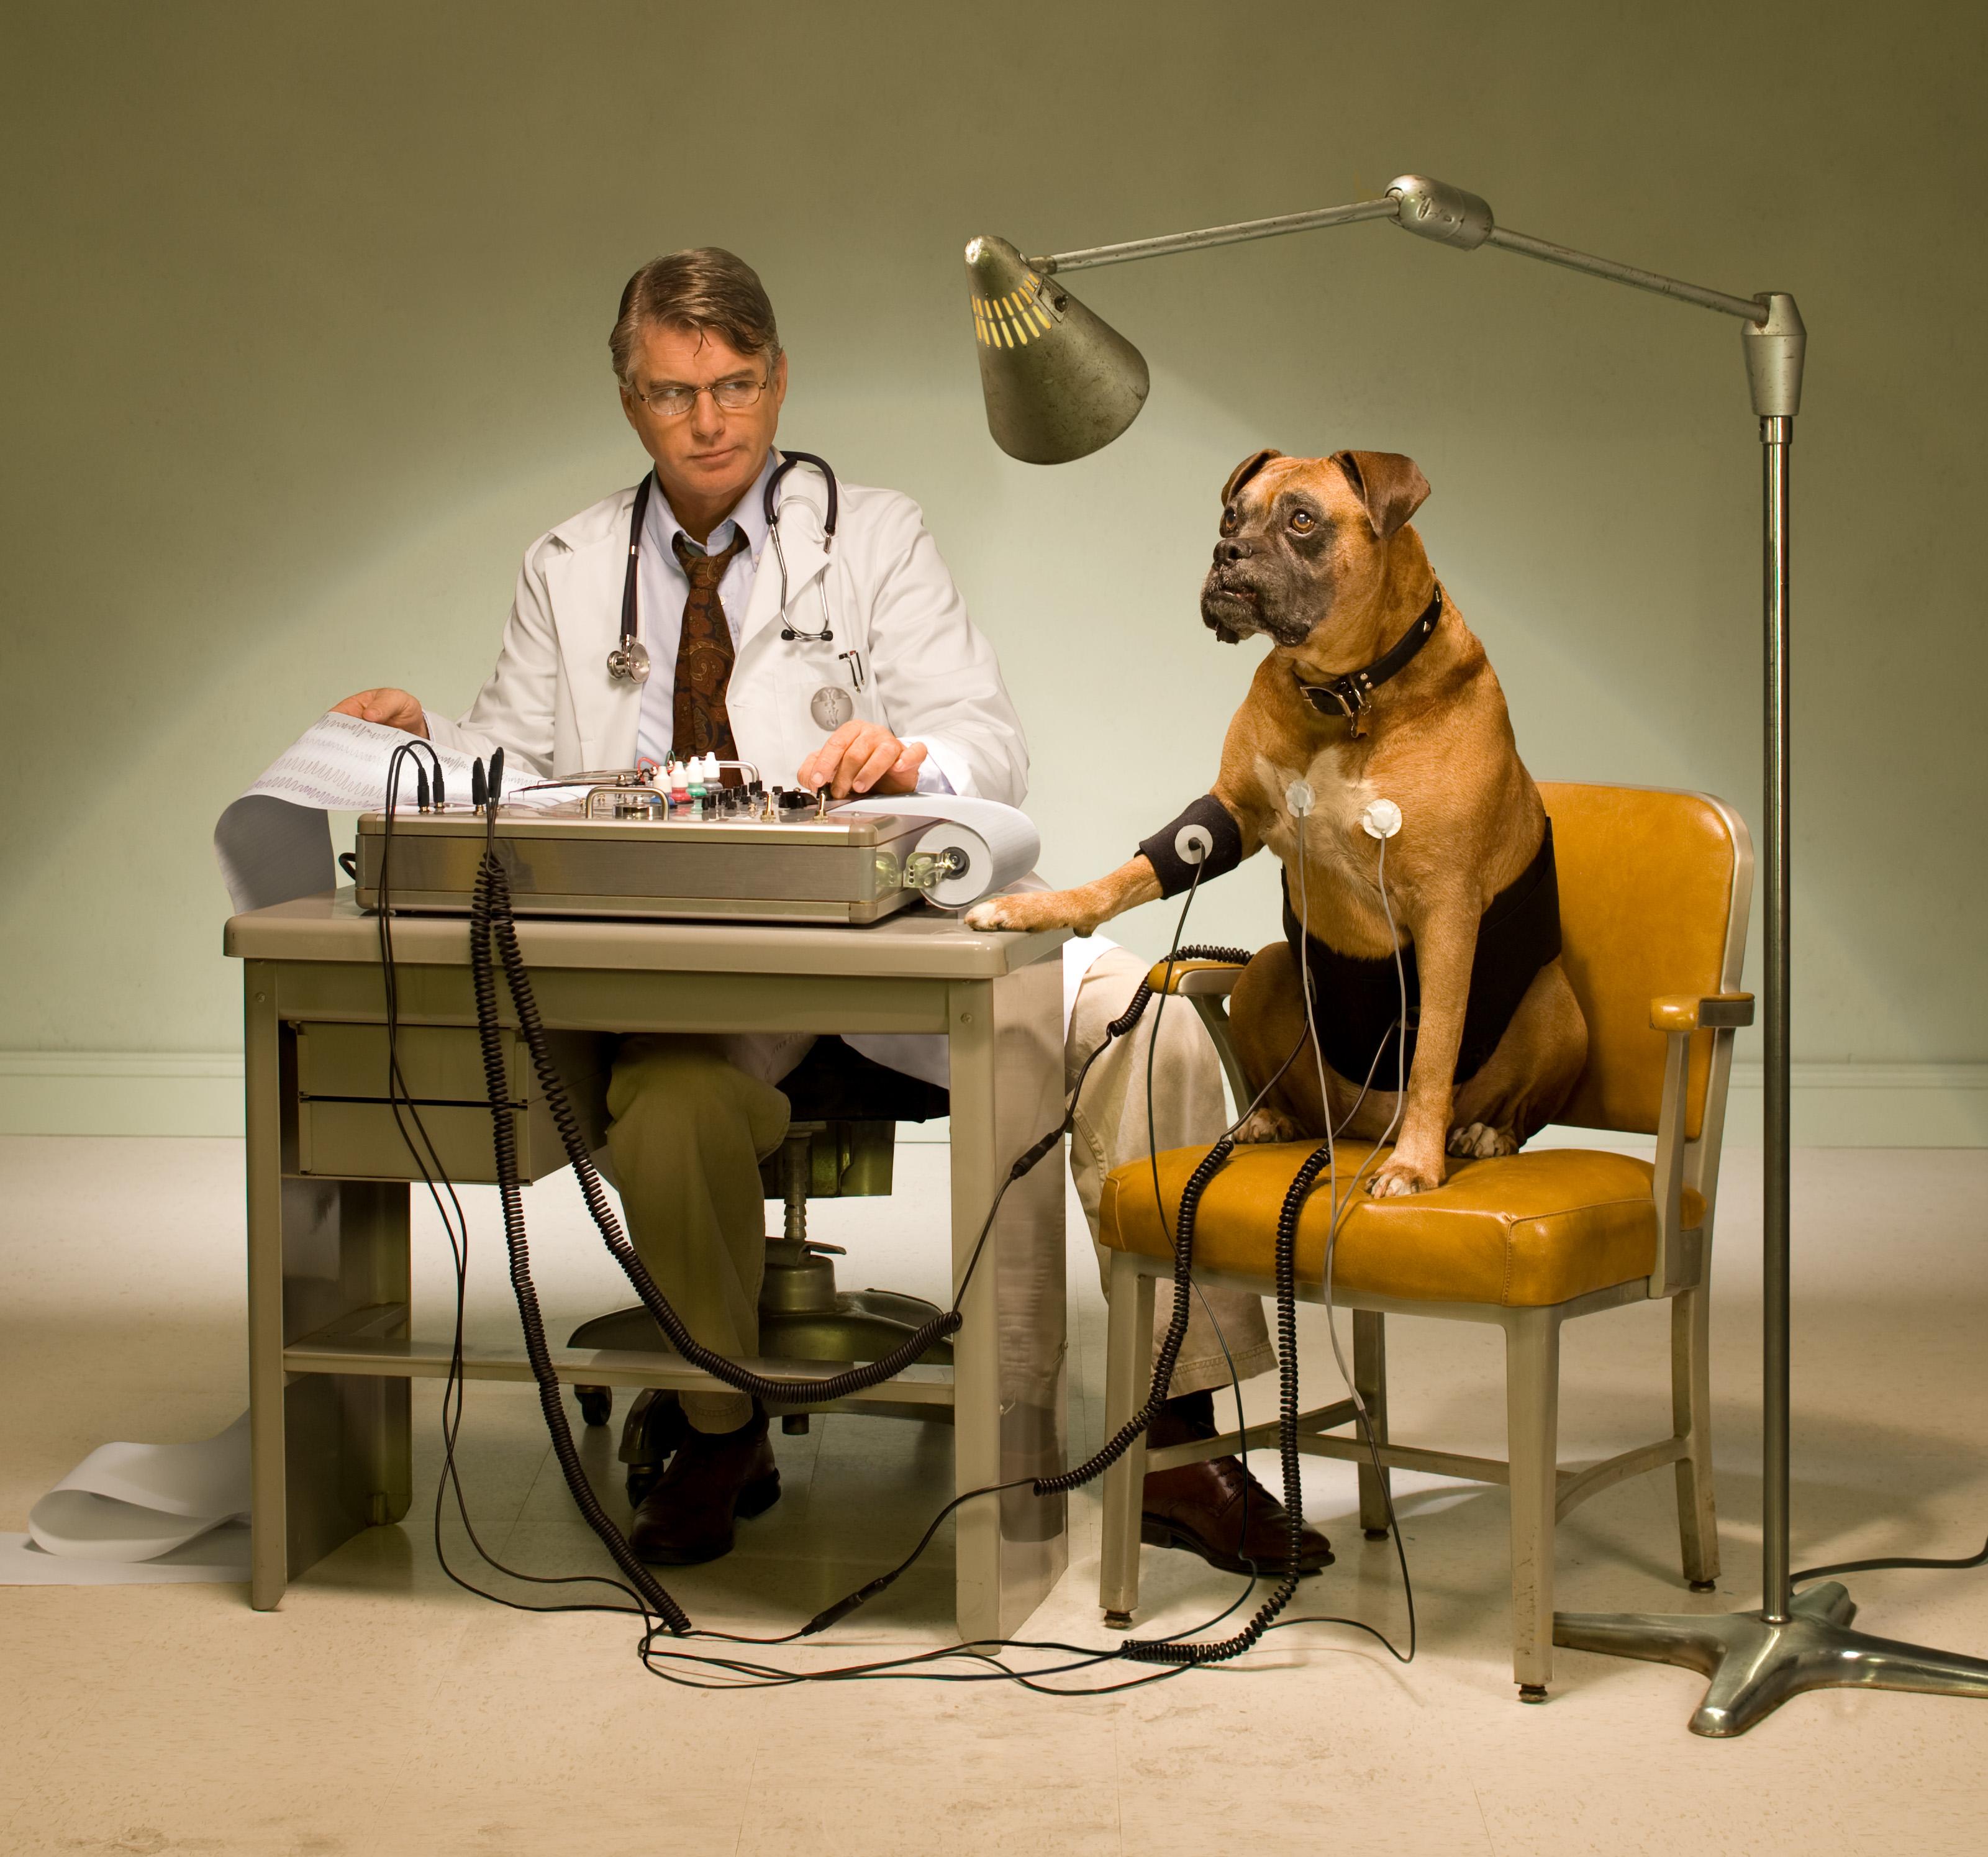 Lie Detector Dog - Photograph by Nick Vedros